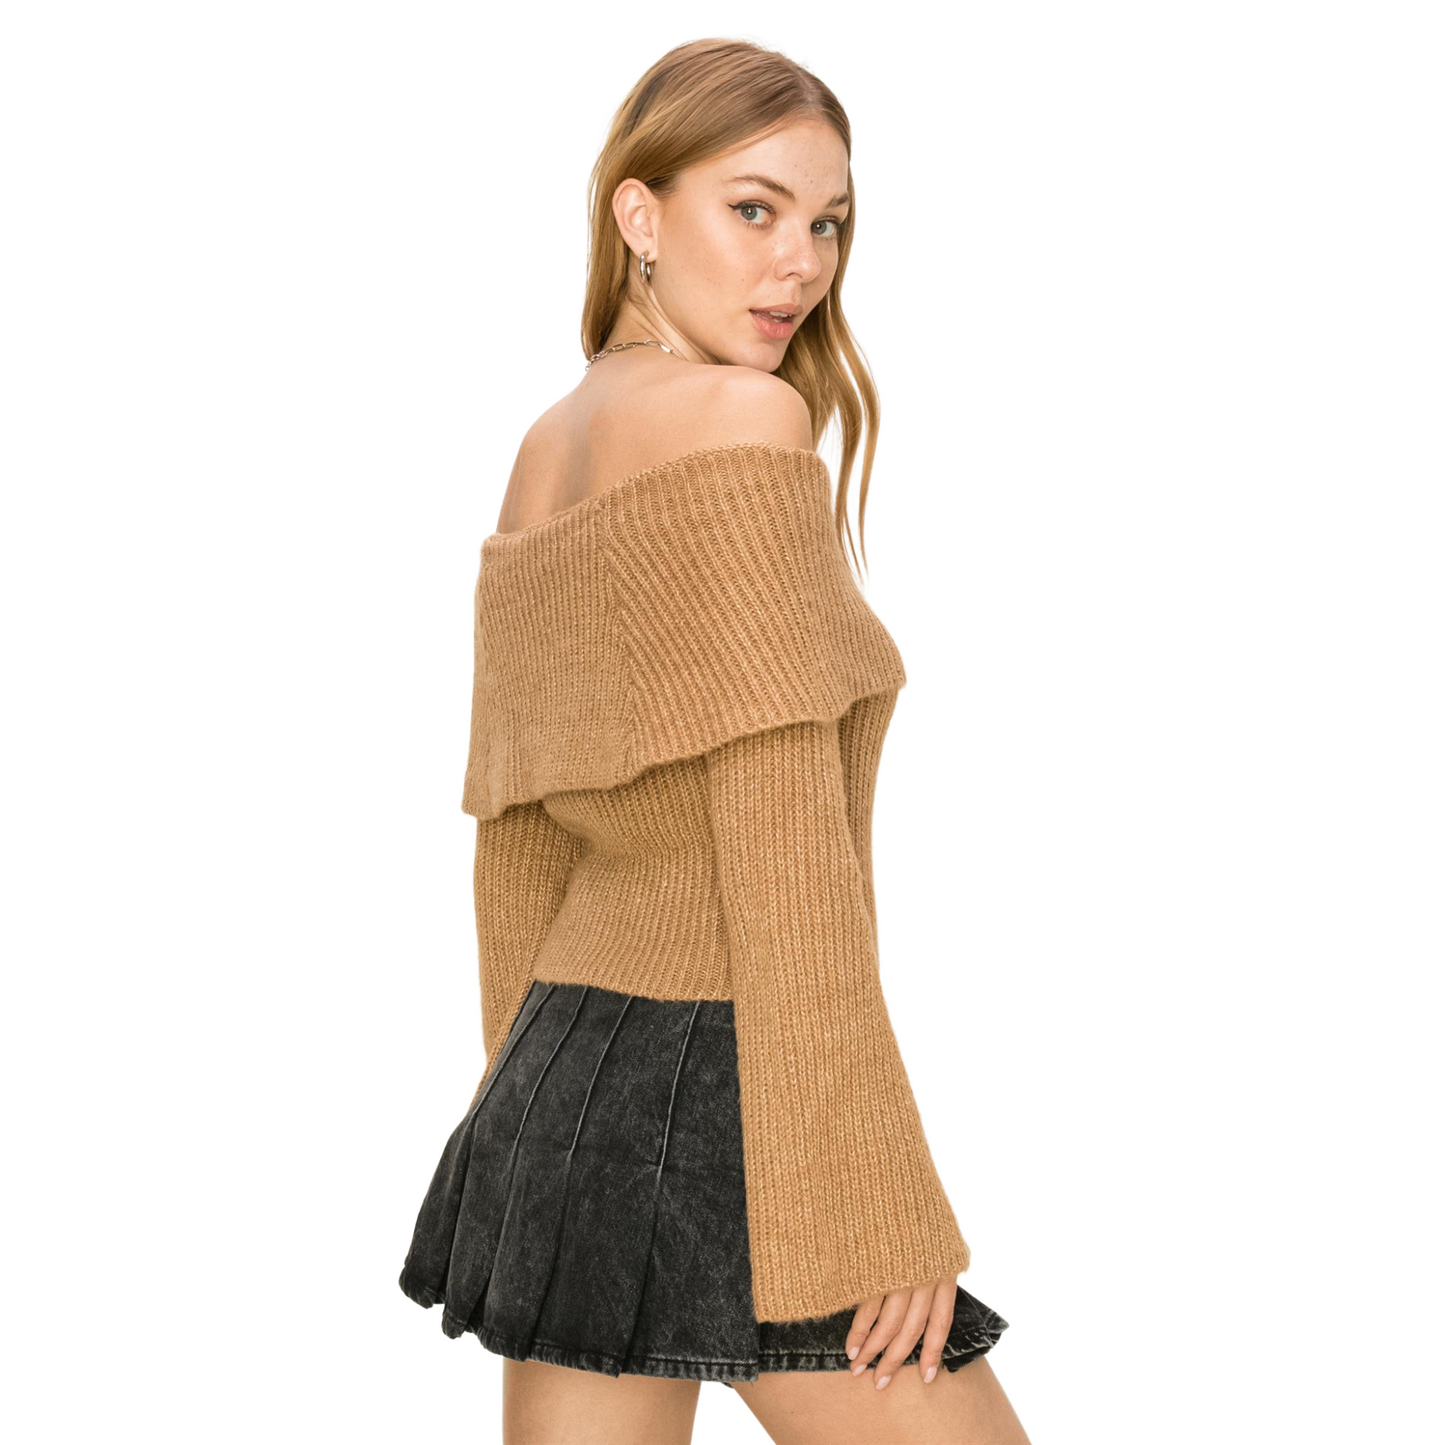 Hyfve Knit Turtle Neck Sweater W/ Bell Sleeves (3 Colors! S-L)